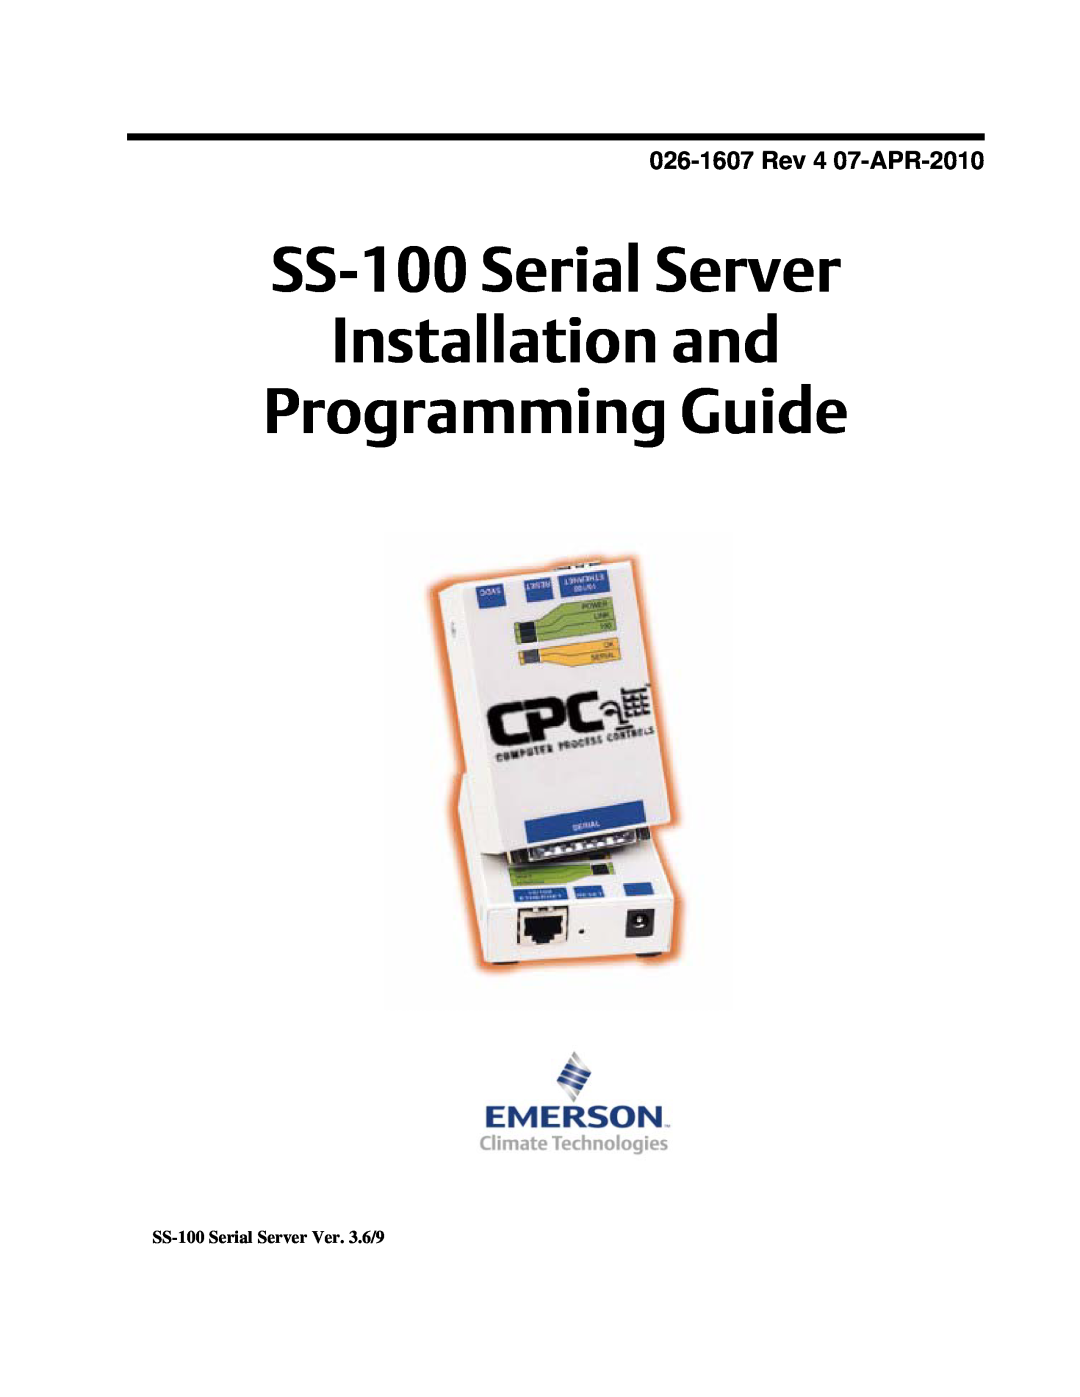 Emerson manual Rev 4 07-APR-2010, SS-100 Serial Server Installation and Programming Guide 